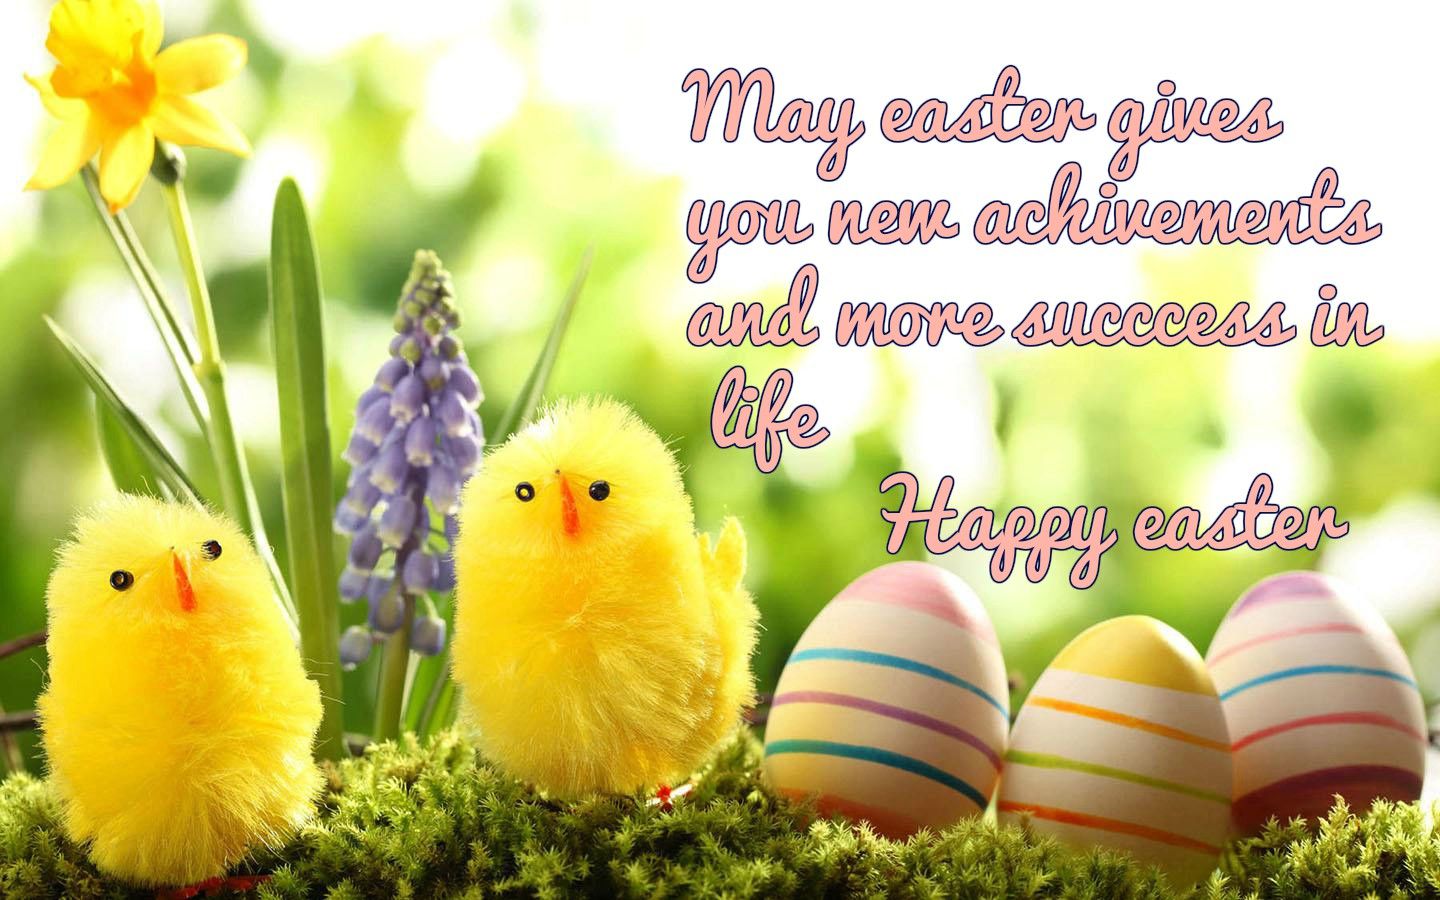 Happy Easter Image 2021. Picture, Wallpaper, Photo, Pics, Background, Clip Arts Image free Download. Happy Easter Image 2021. Easter Picture. Good Friday Image. Passover Image. Easter Bunny Image Picture